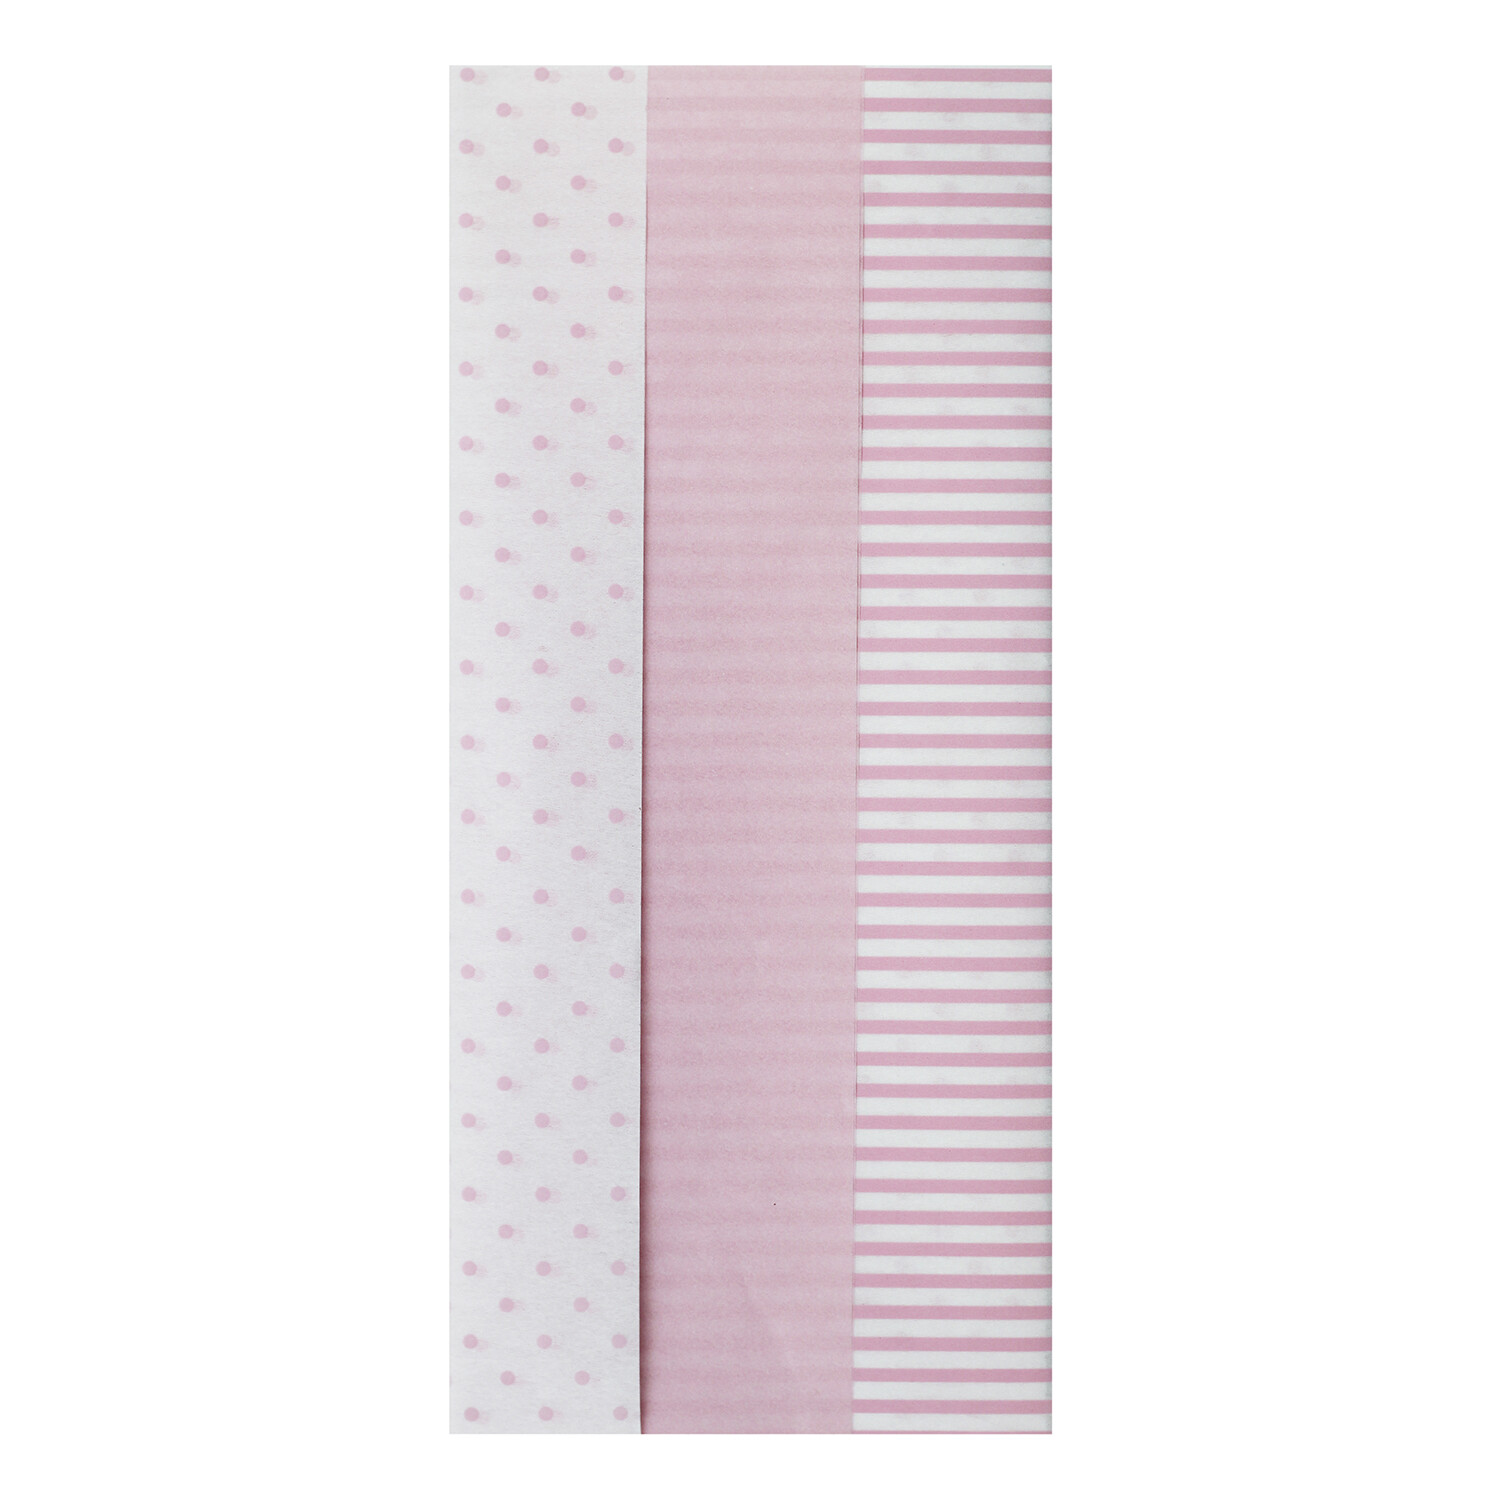 Pack of 6 Baby Pink Tissue Paper Image